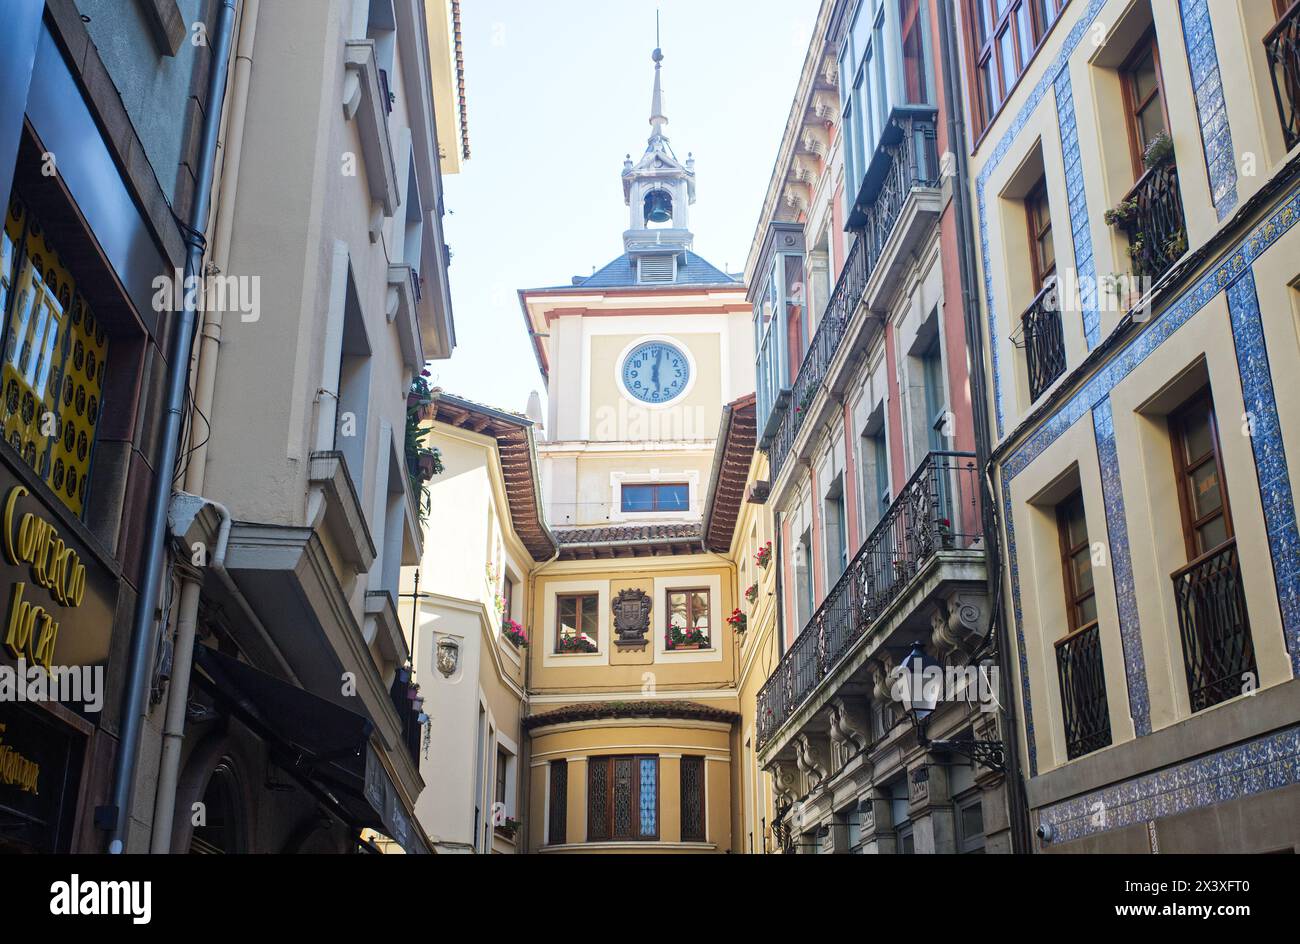 The Oviedo City Council is the institution that is responsible for governing the council of Oviedo, capital of Asturias, Spain Stock Photo